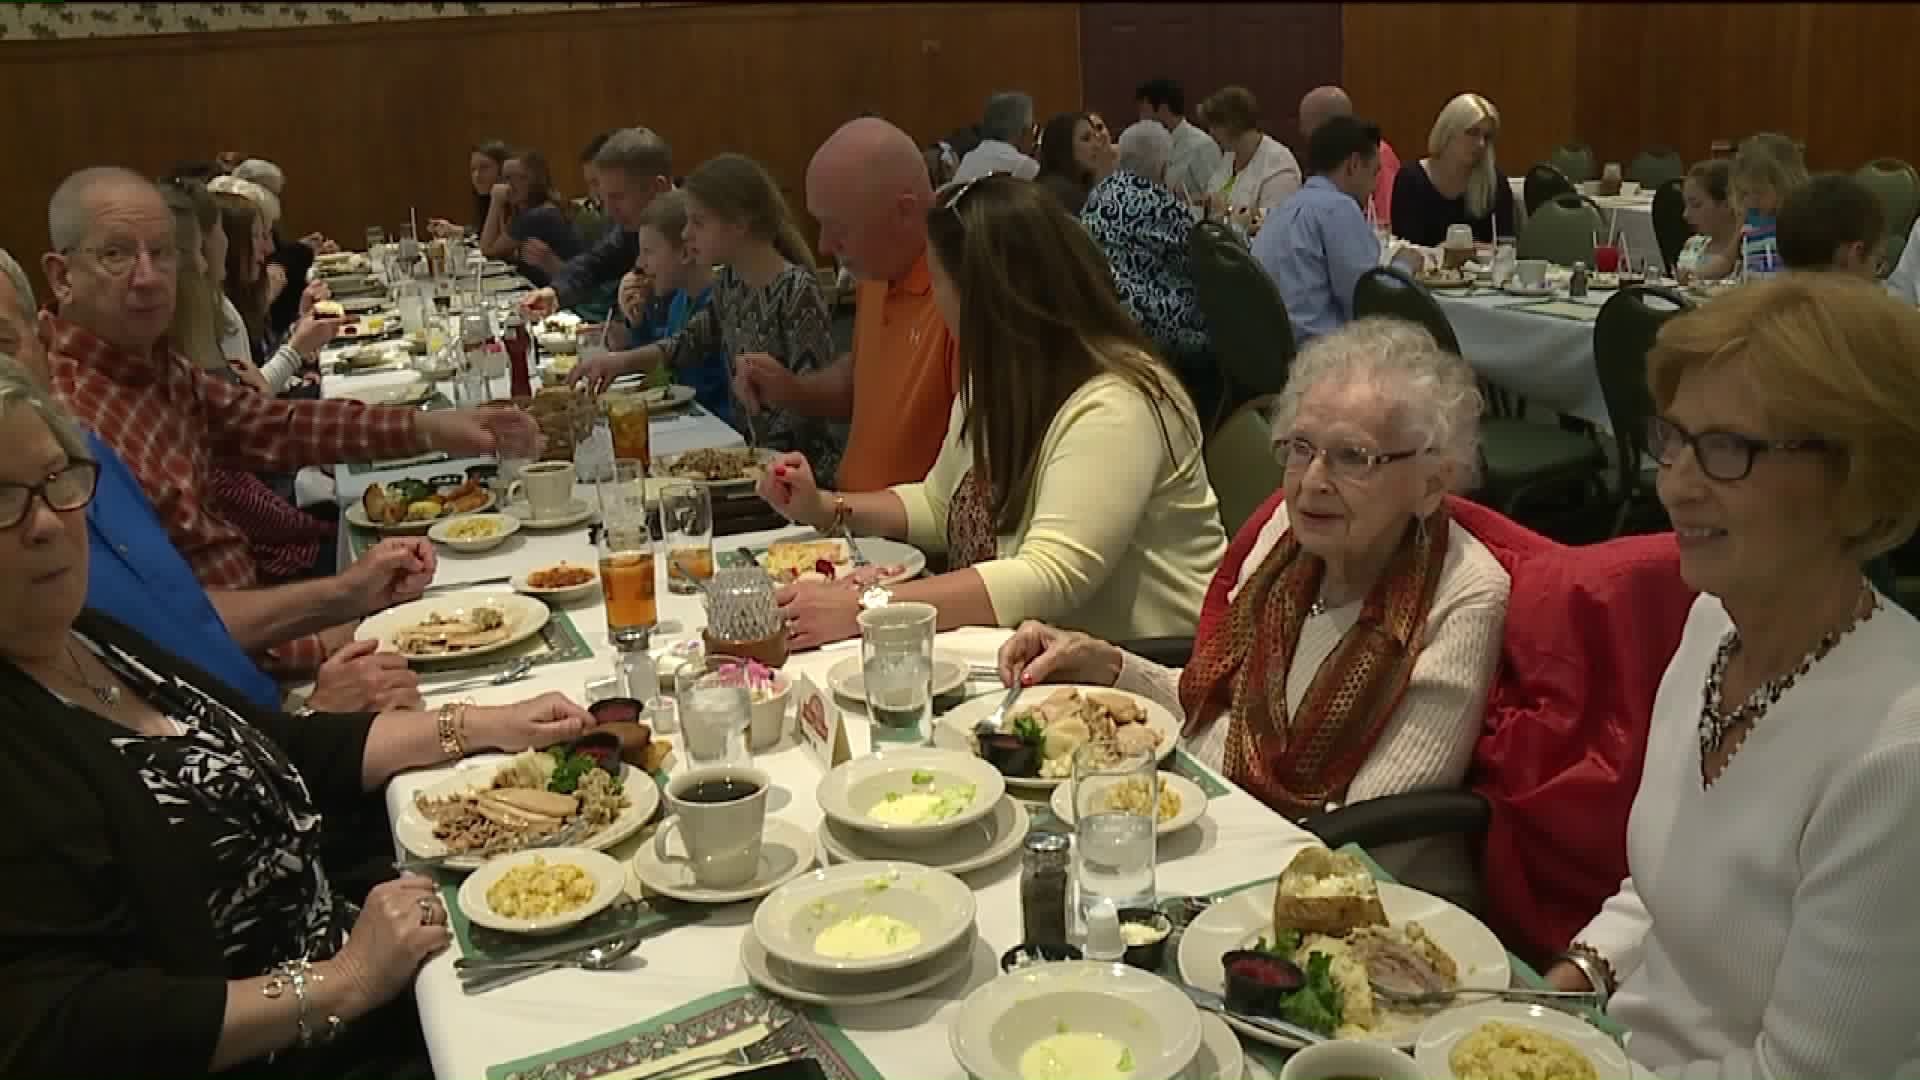 Restaurant Serves Up Mother`s Day in a Big Way